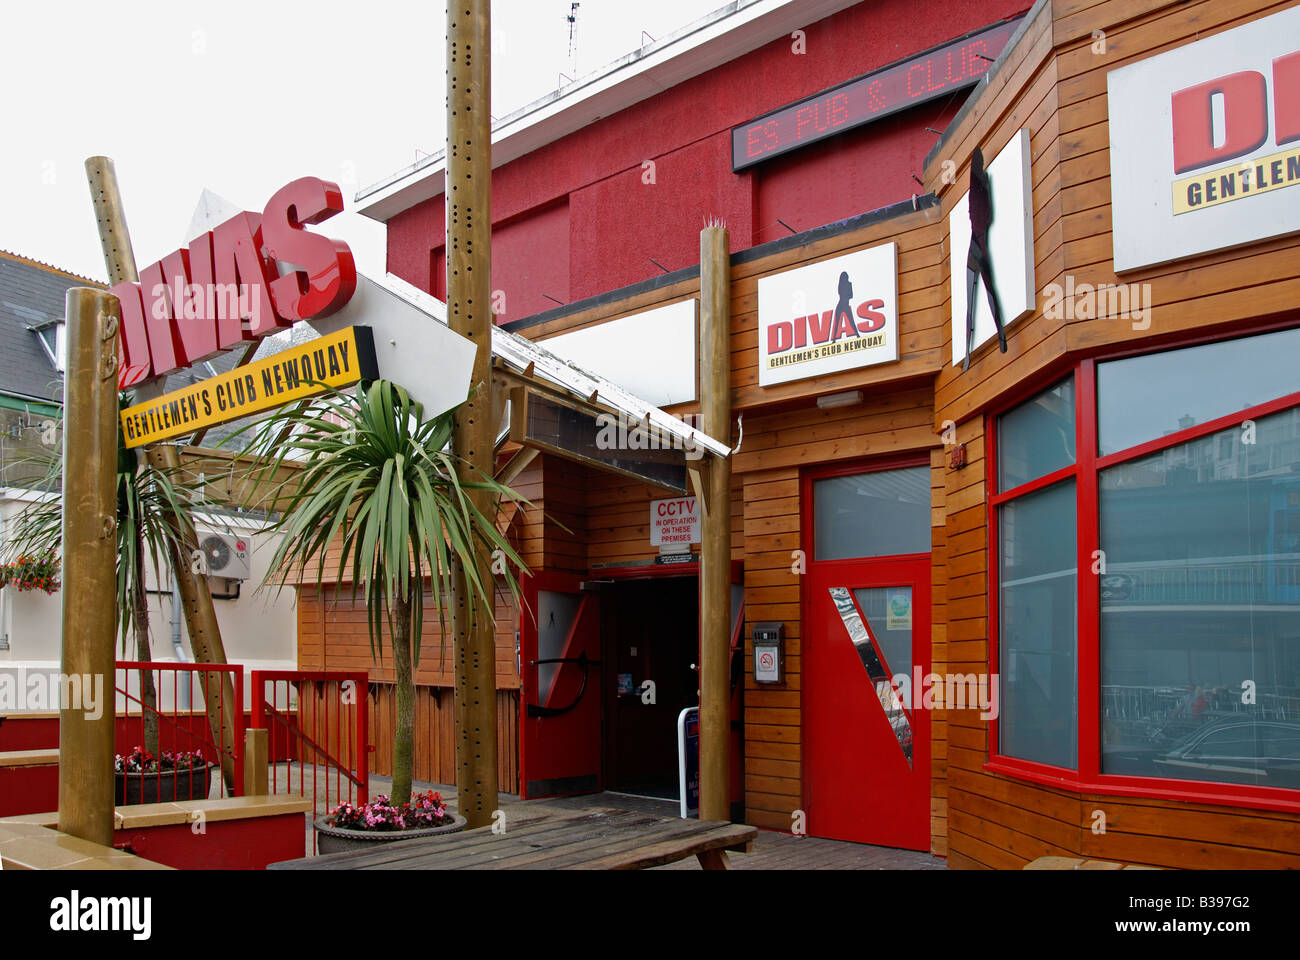 the entrance of a lap dancing club in newquay,cornwall,england,uk Stock Photo